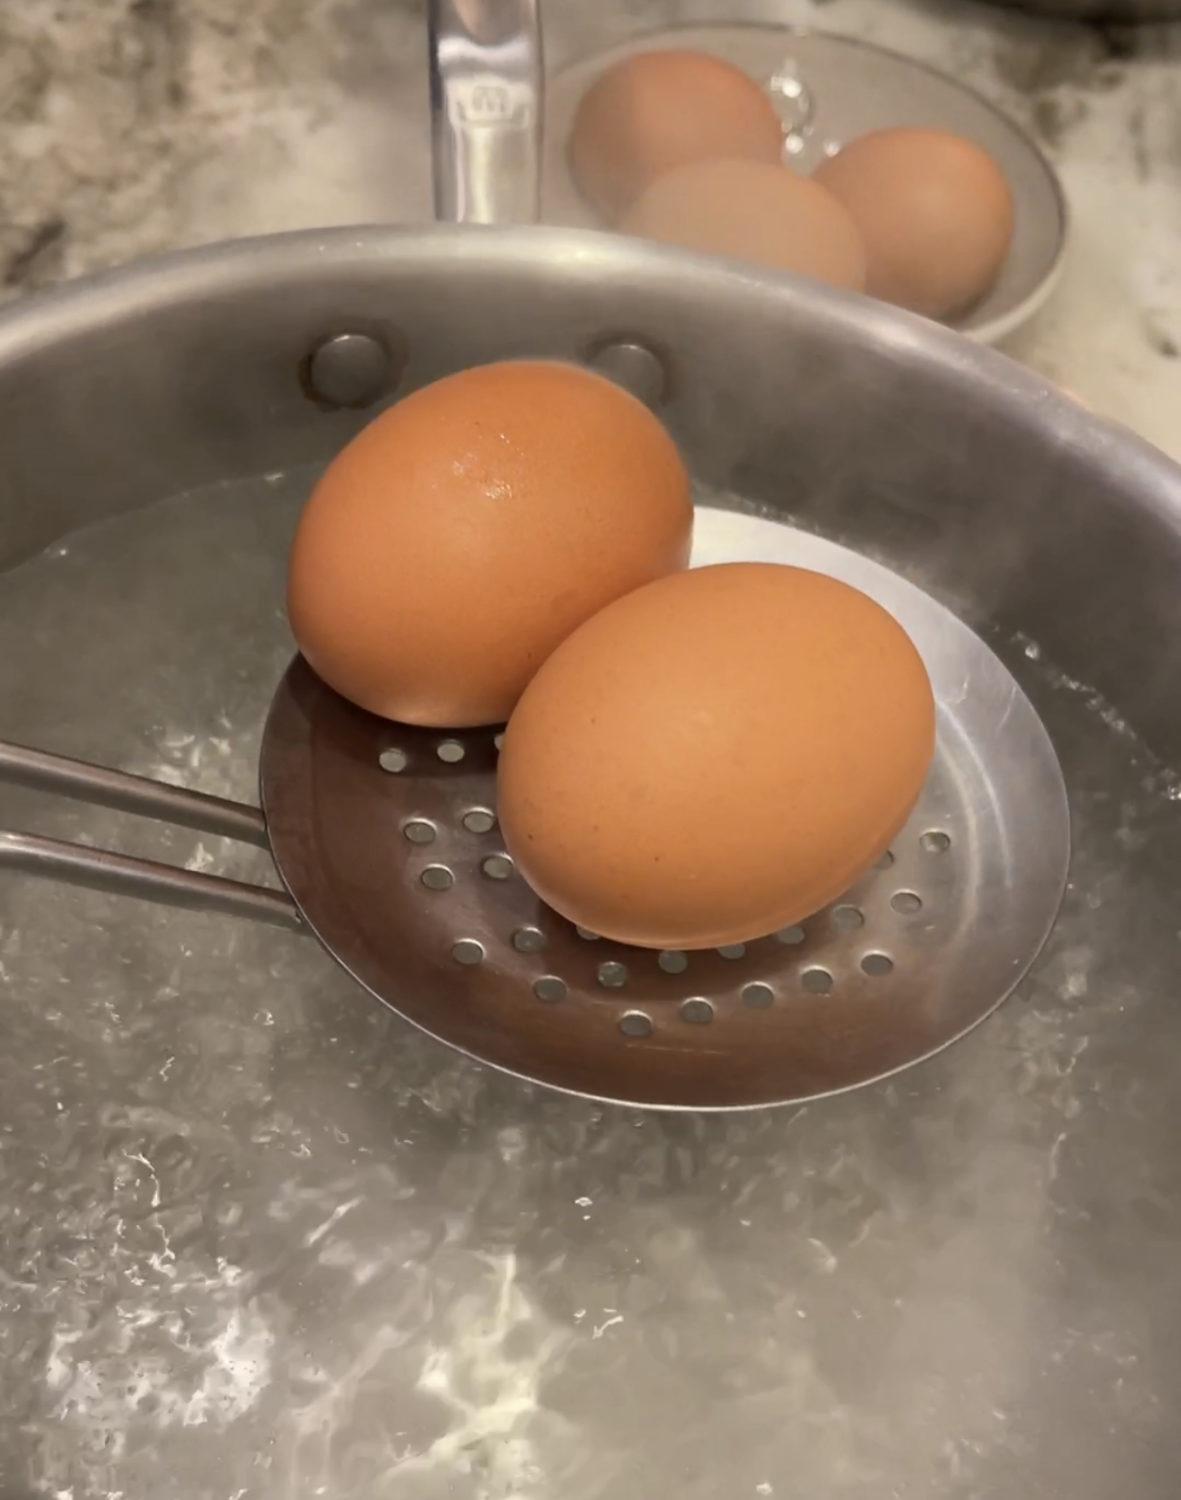 eggs going into boiling water